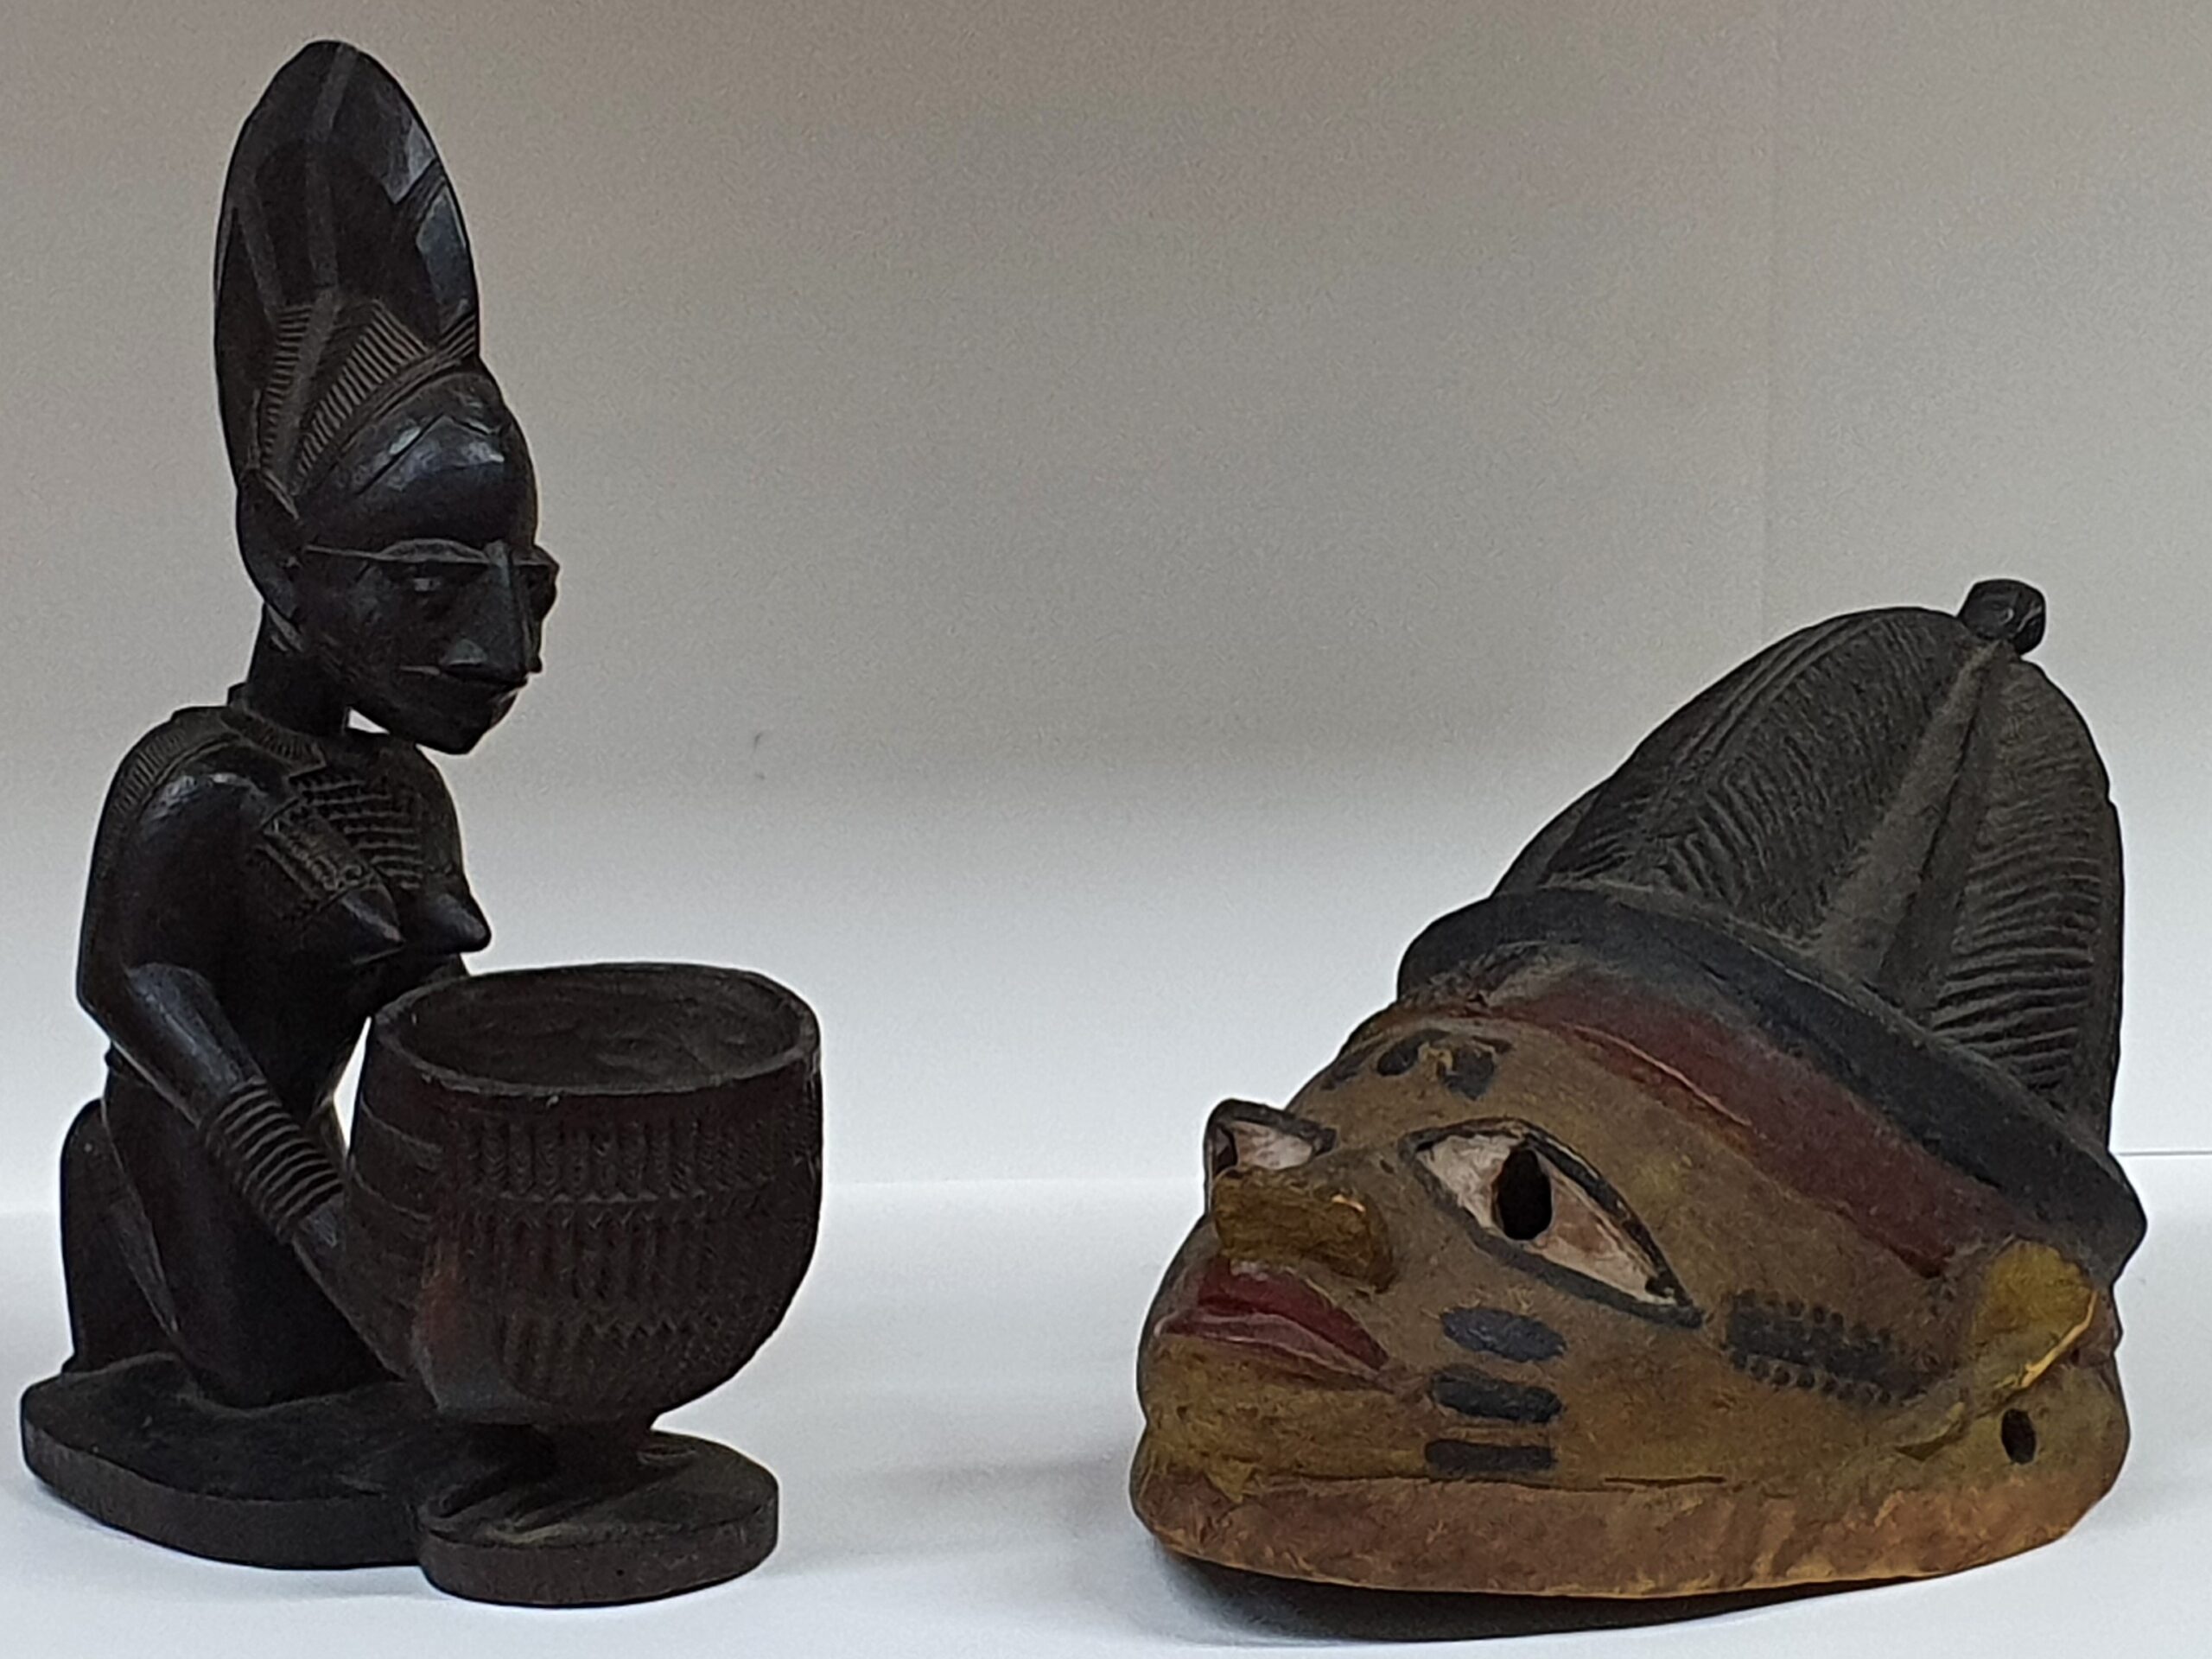 A small wooden statue and a wooden mask